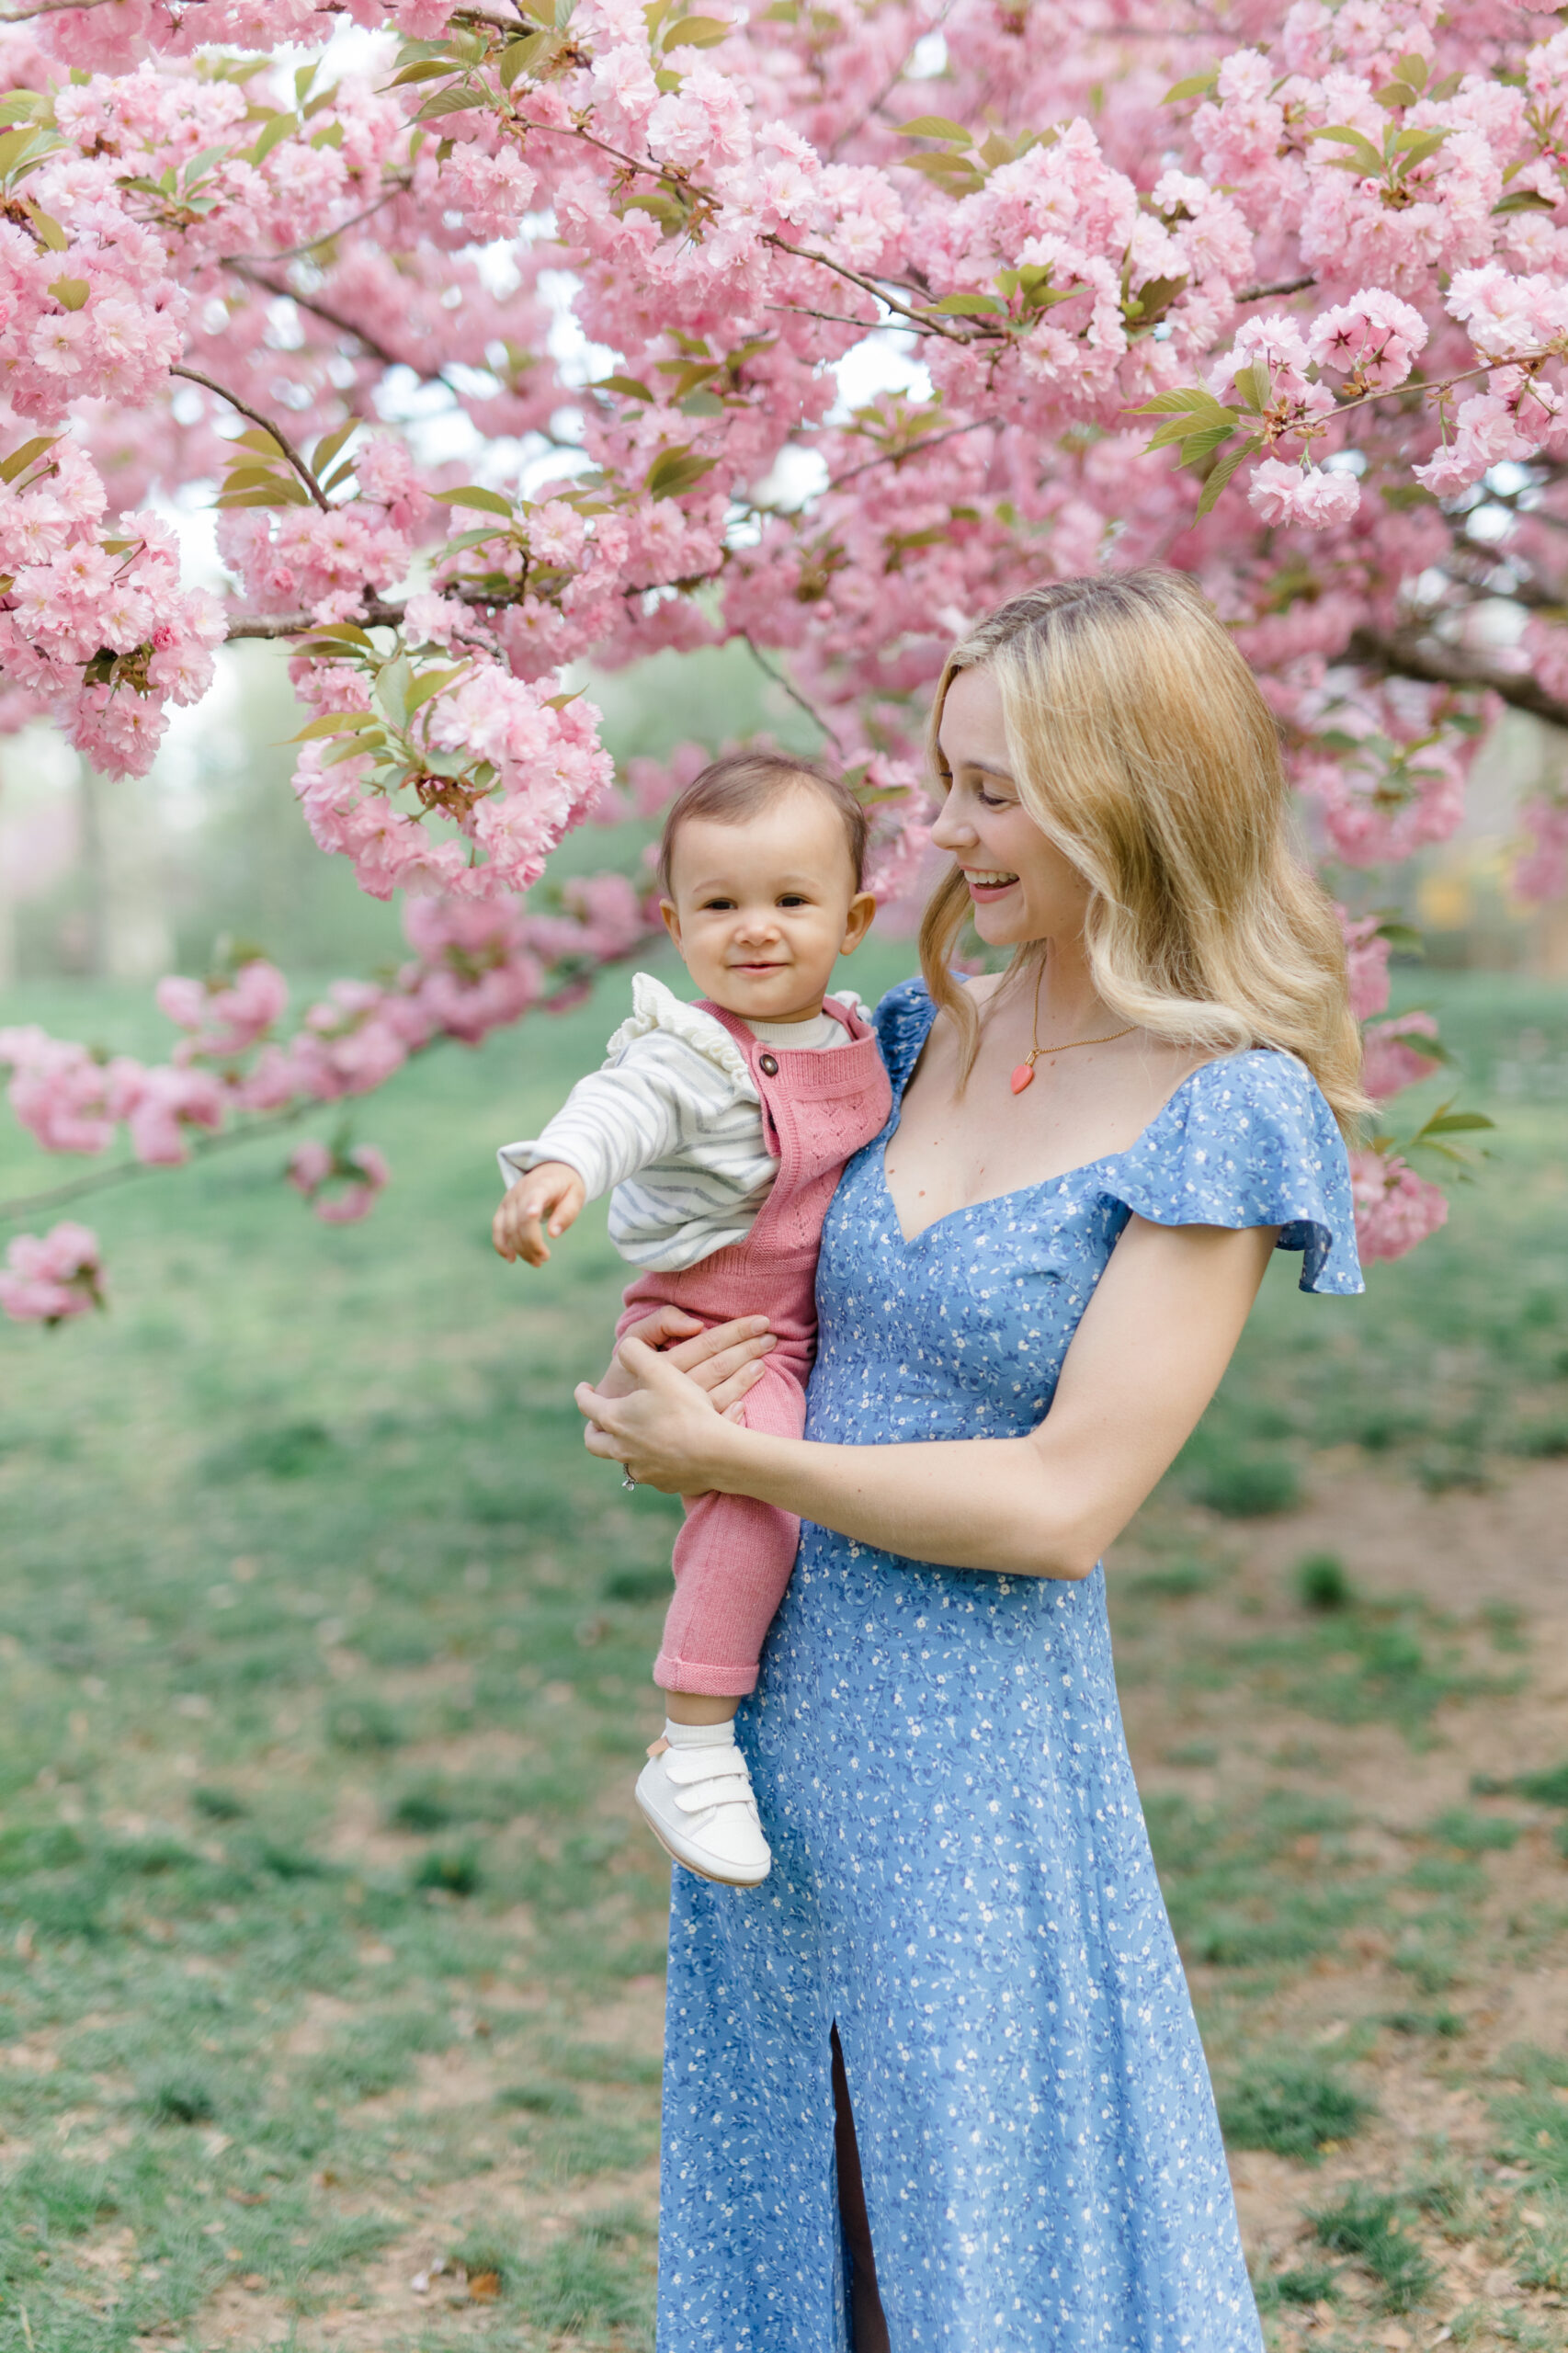 A mom holds her baby in the cherry blossoms at a spring family mini session in Central Park shot by Jacqueline Clair Photography